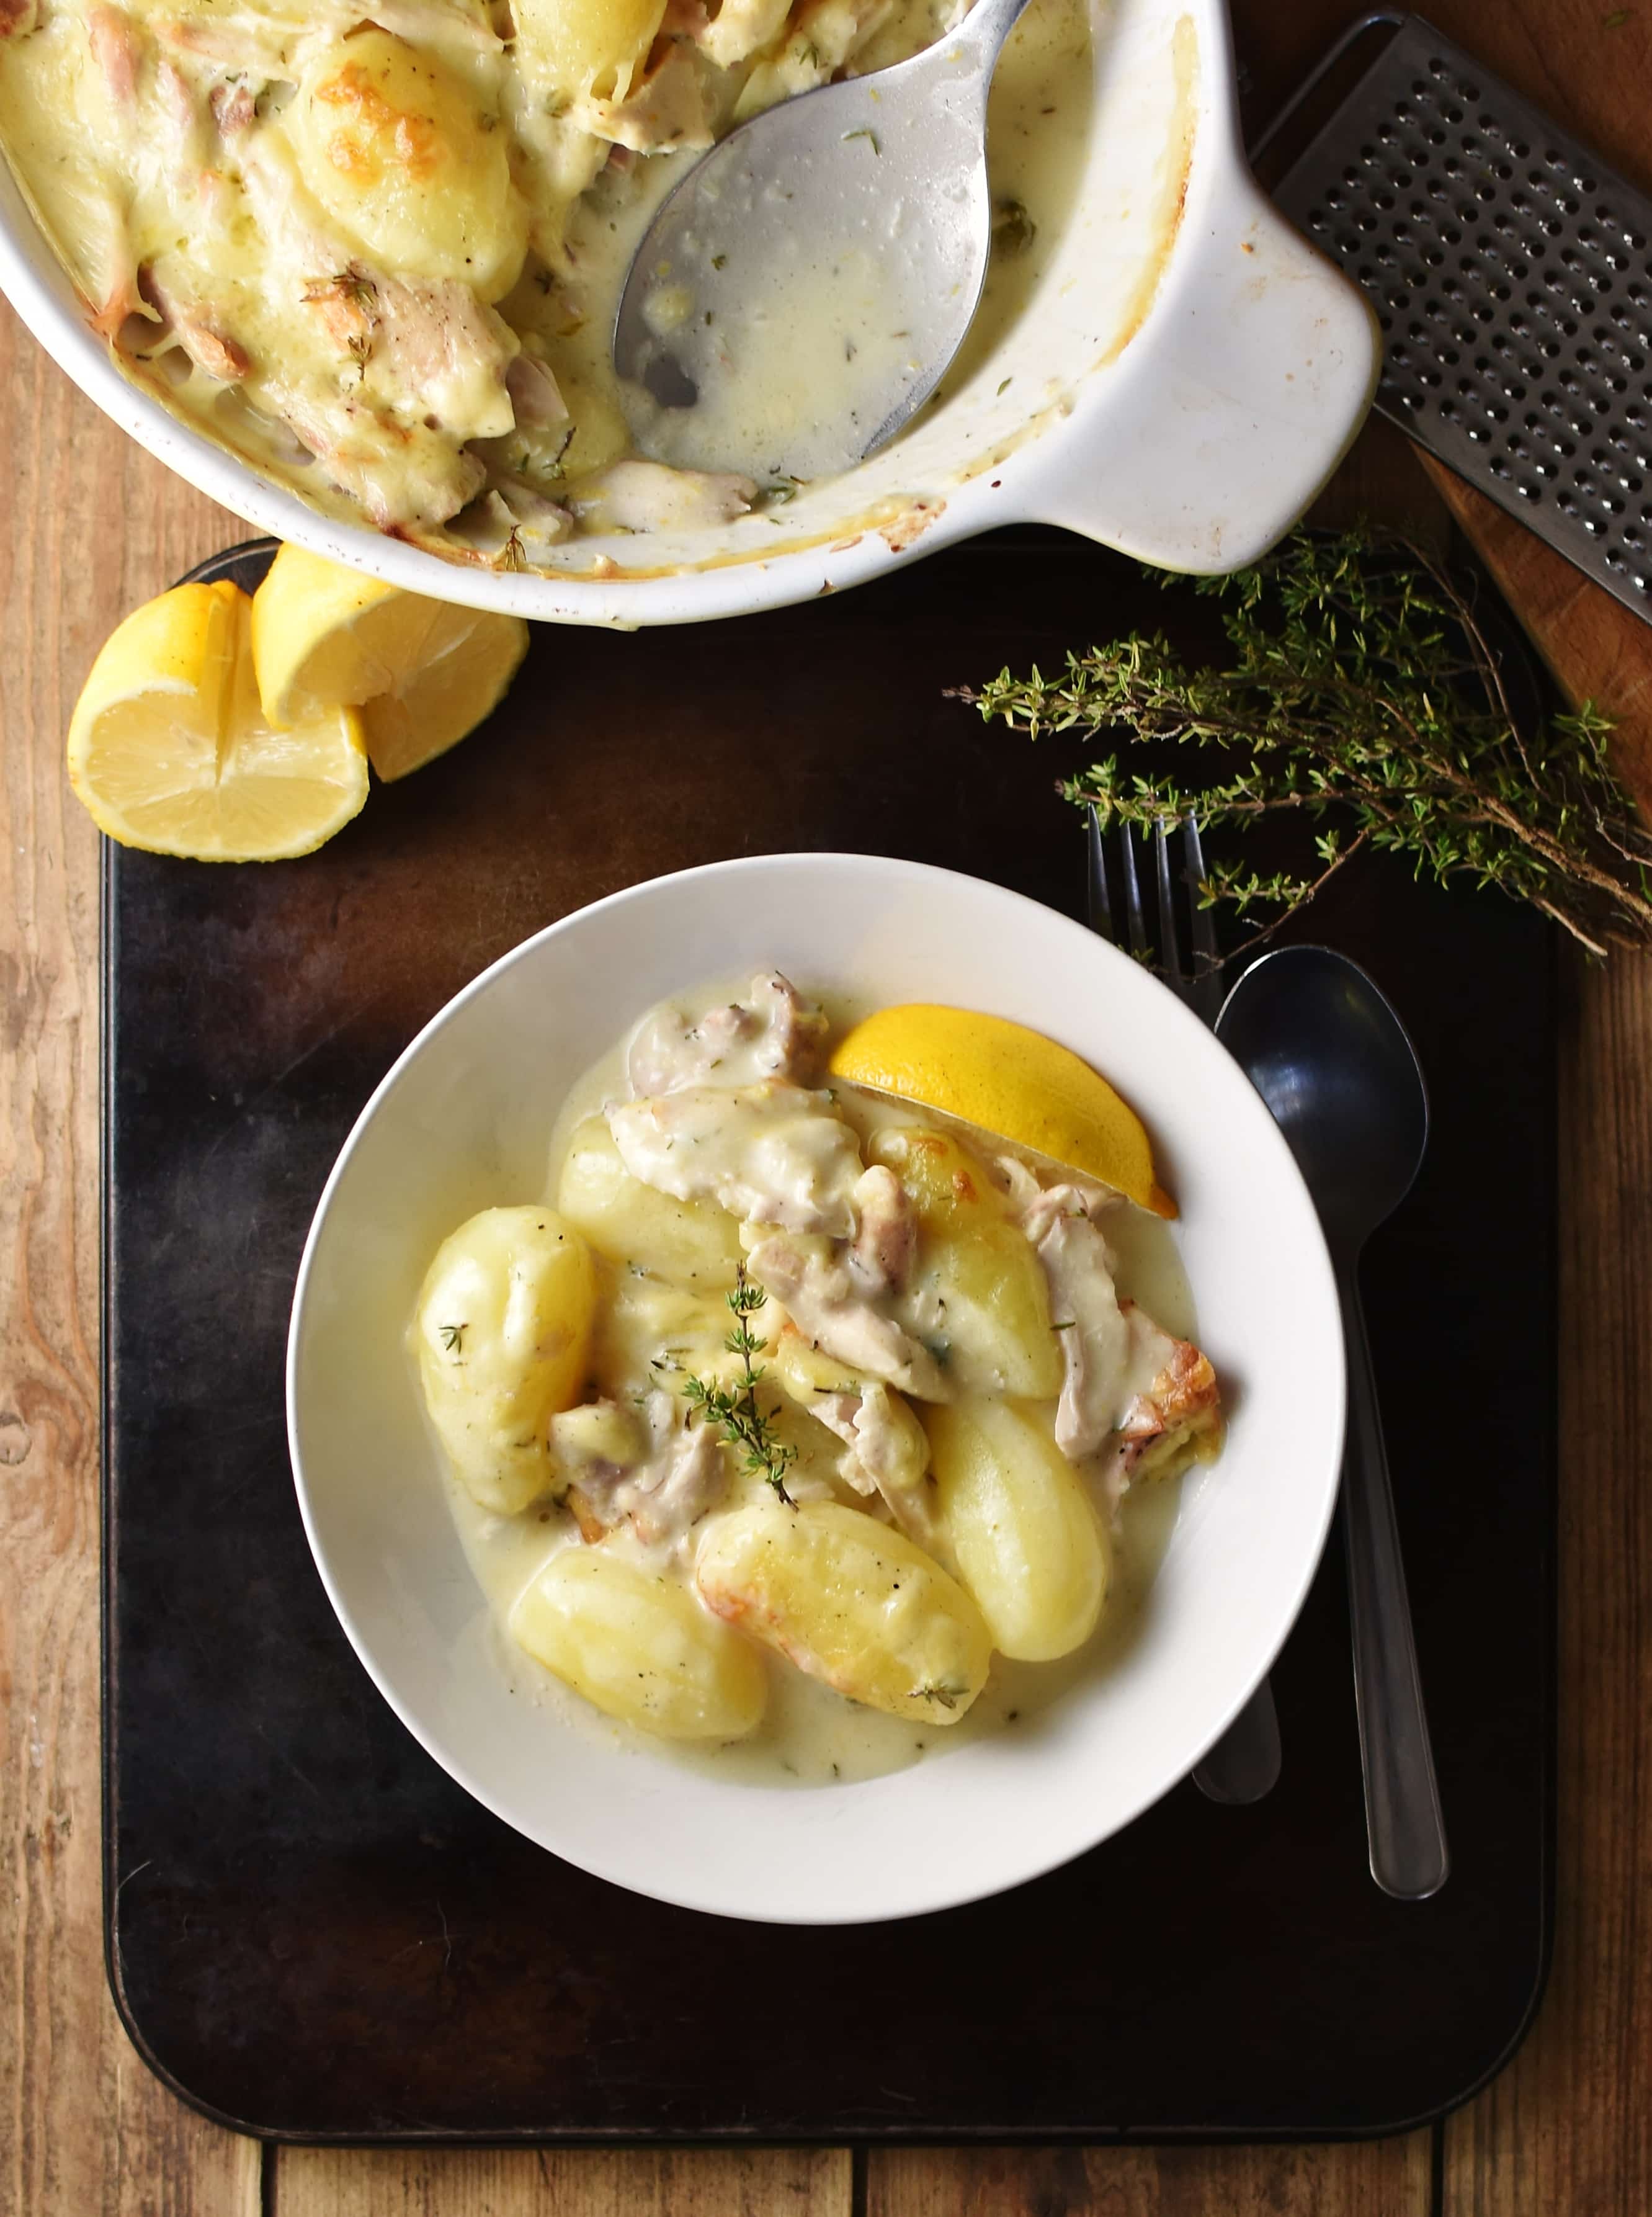 Top down view of potatoes and chicken pieces in creamy sauce with lemon wedge in white bowl, herbs and halved lemon at top and partial view of white dish.